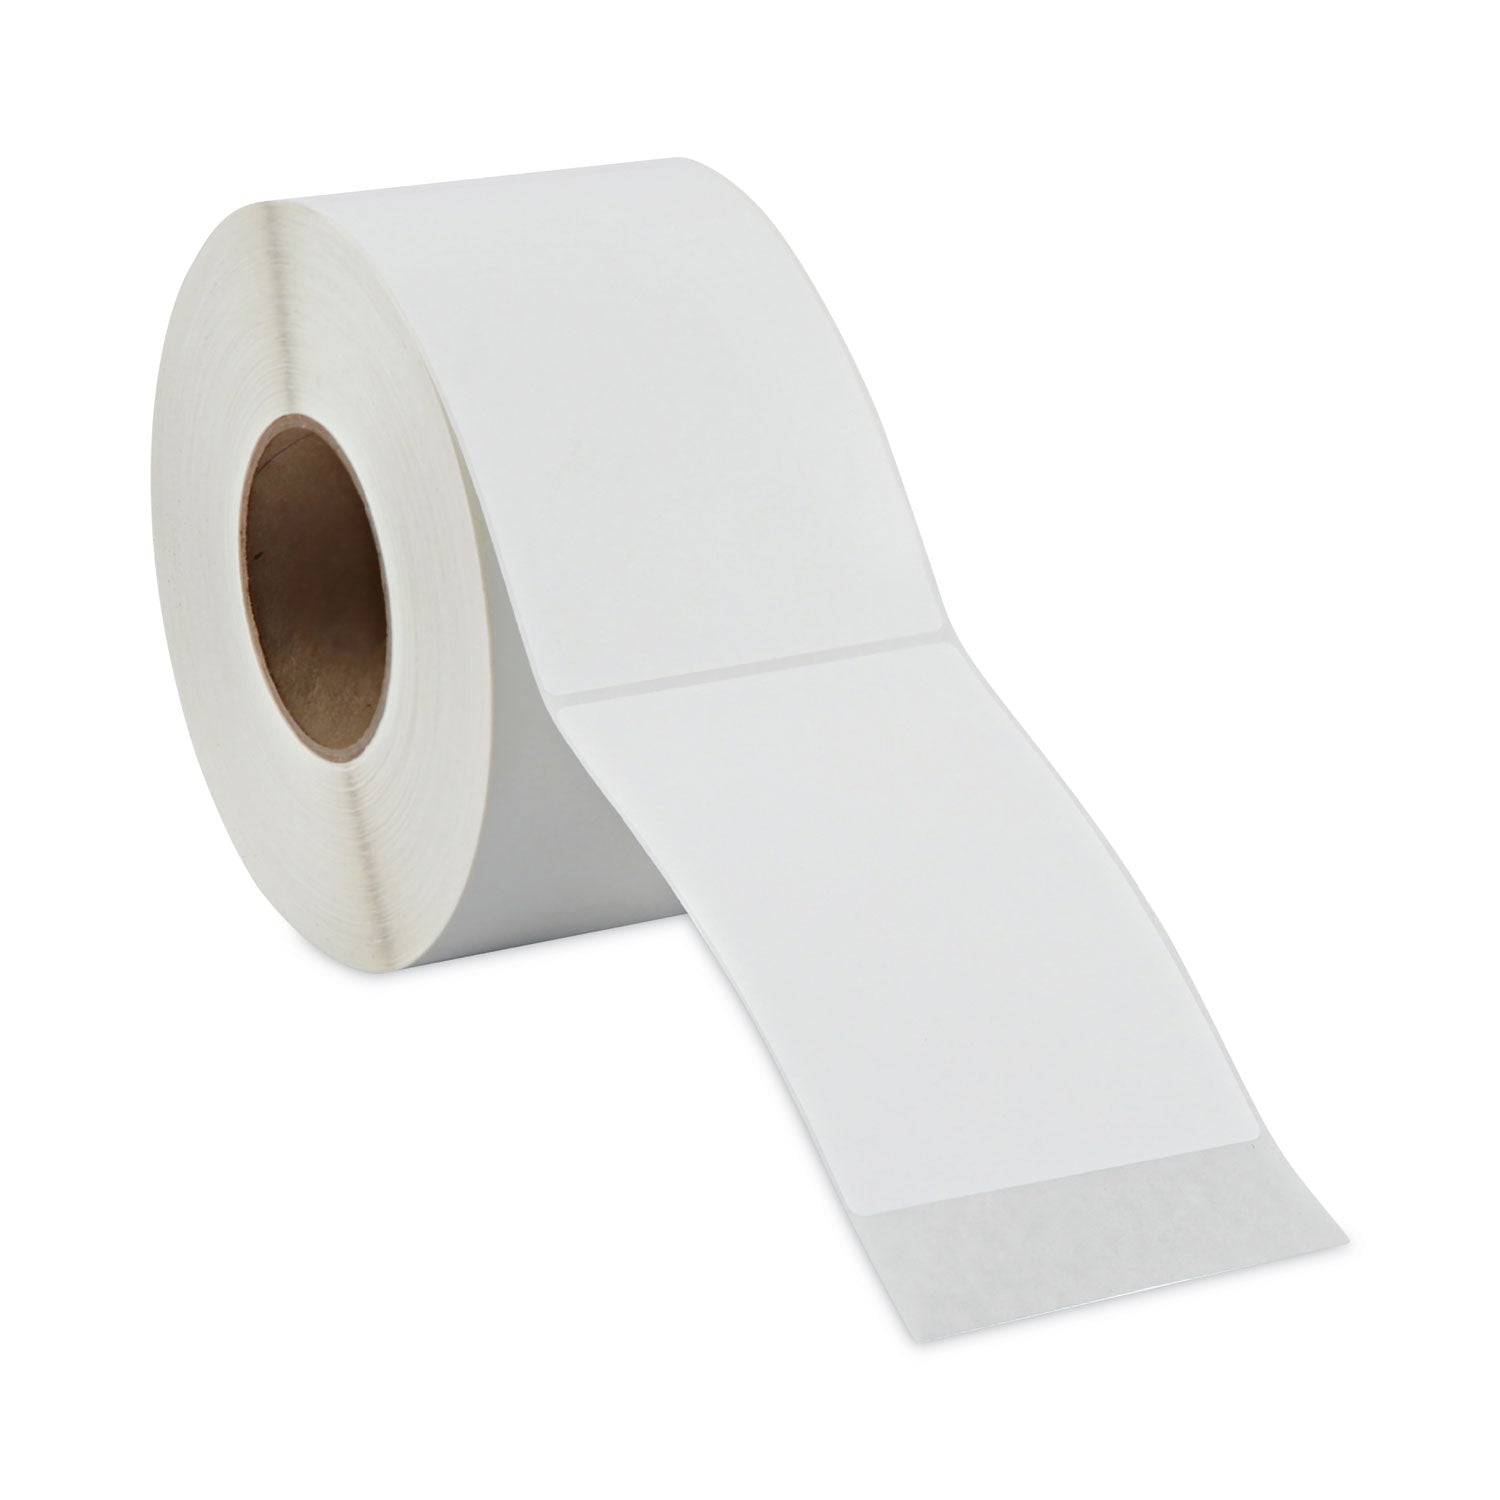 Thermal Transfer Blank Shipping Labels, Label Printers, 4 x 6, White, 1,000/Roll, 4 Rolls/Carton - 